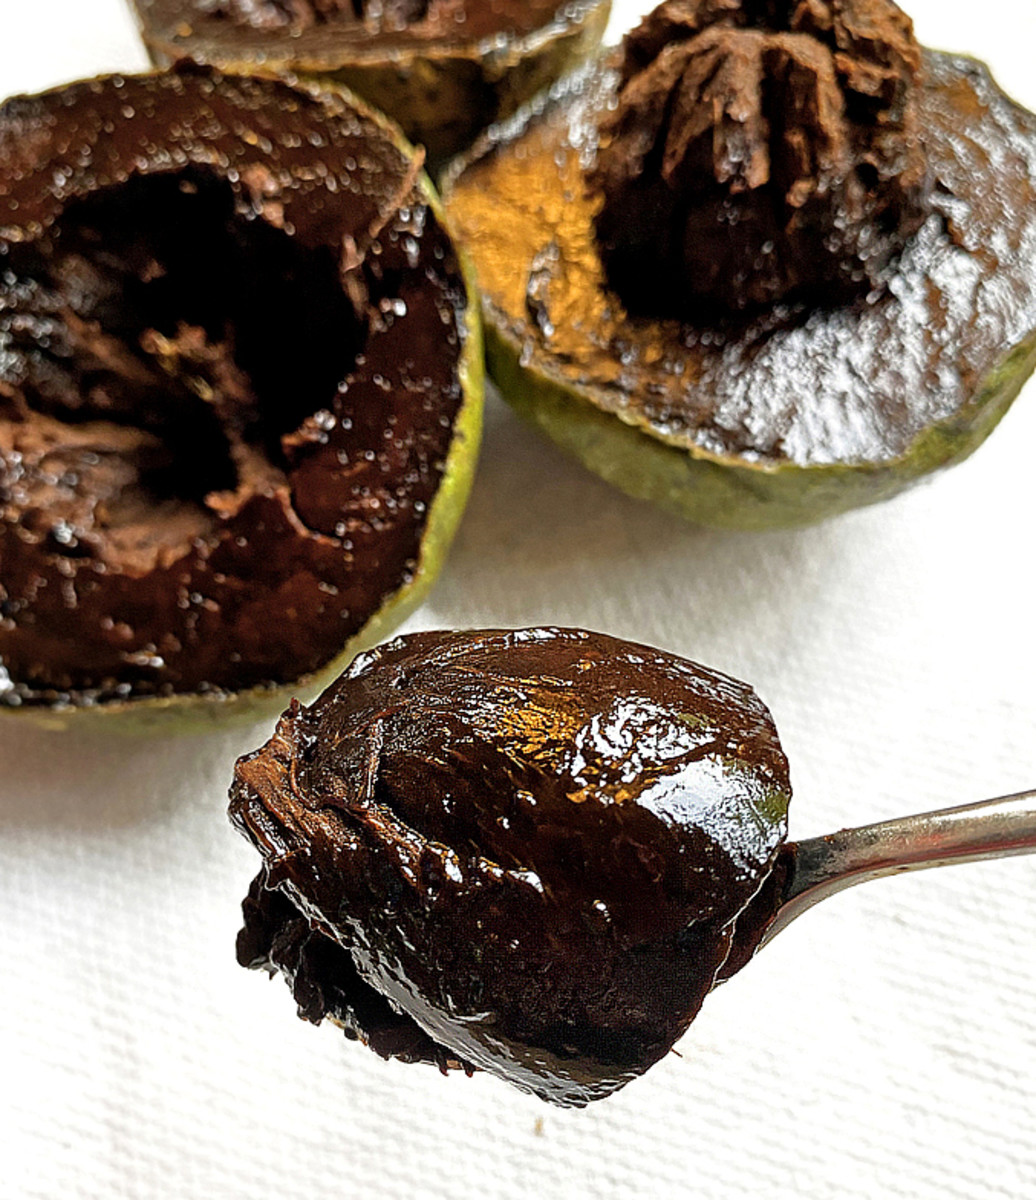 The name chocolate pudding fruit is somewhat misleading because even though the pulp looks like chocolate pudding, it doesn't taste like it!